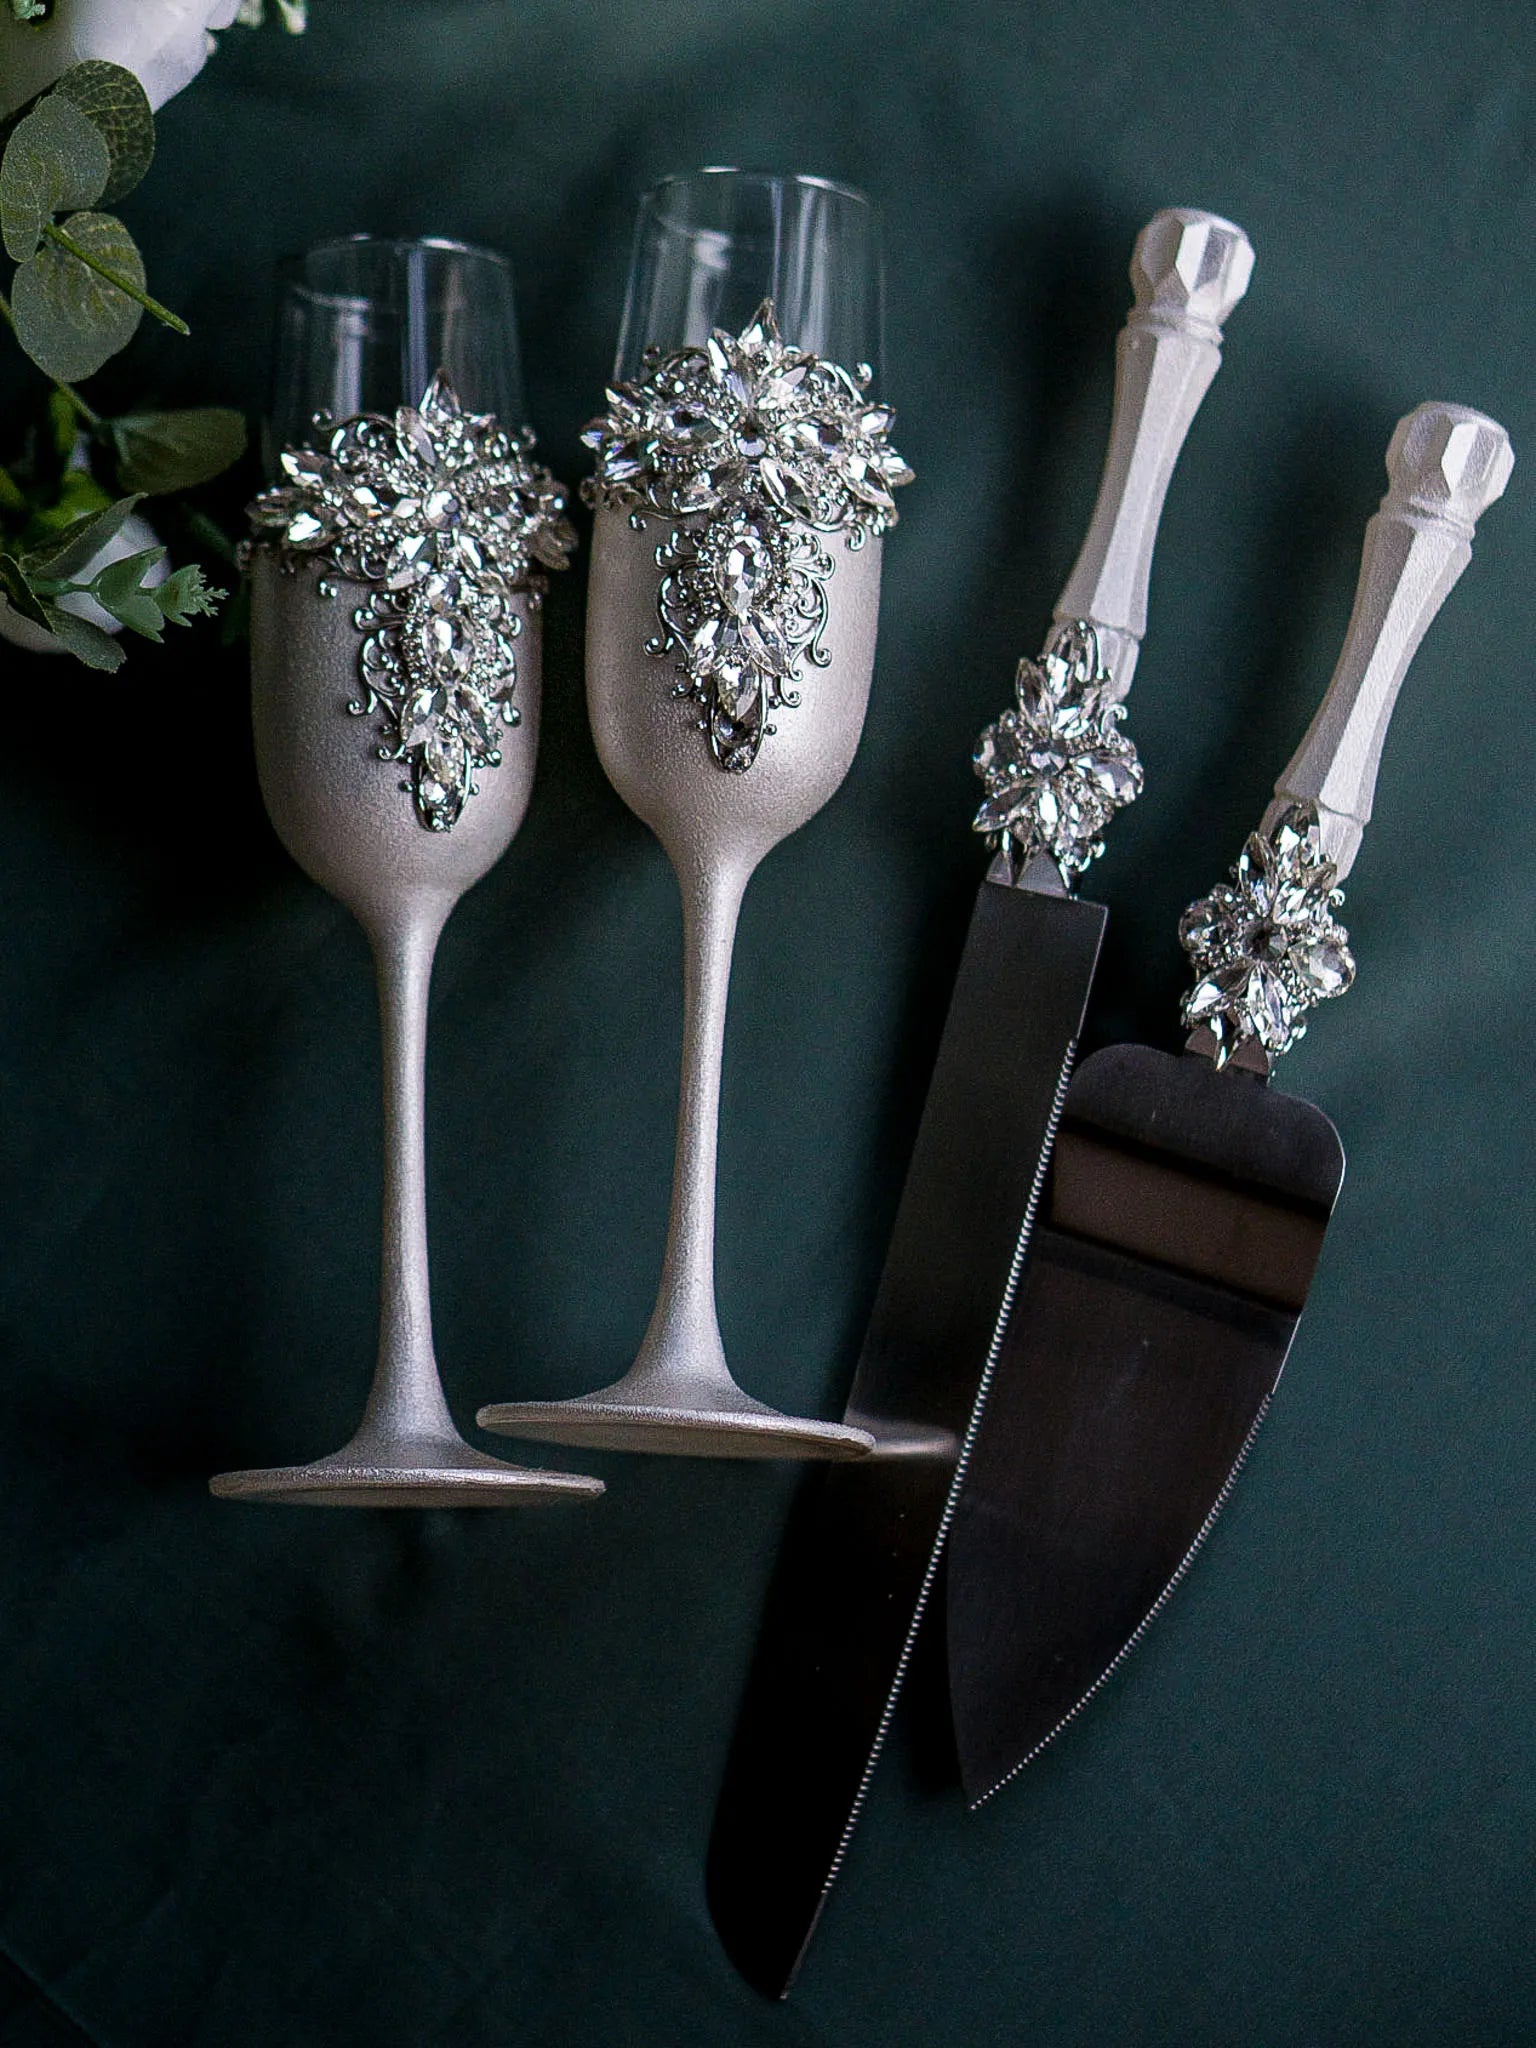 Wedding cake cutting set with silver crystals